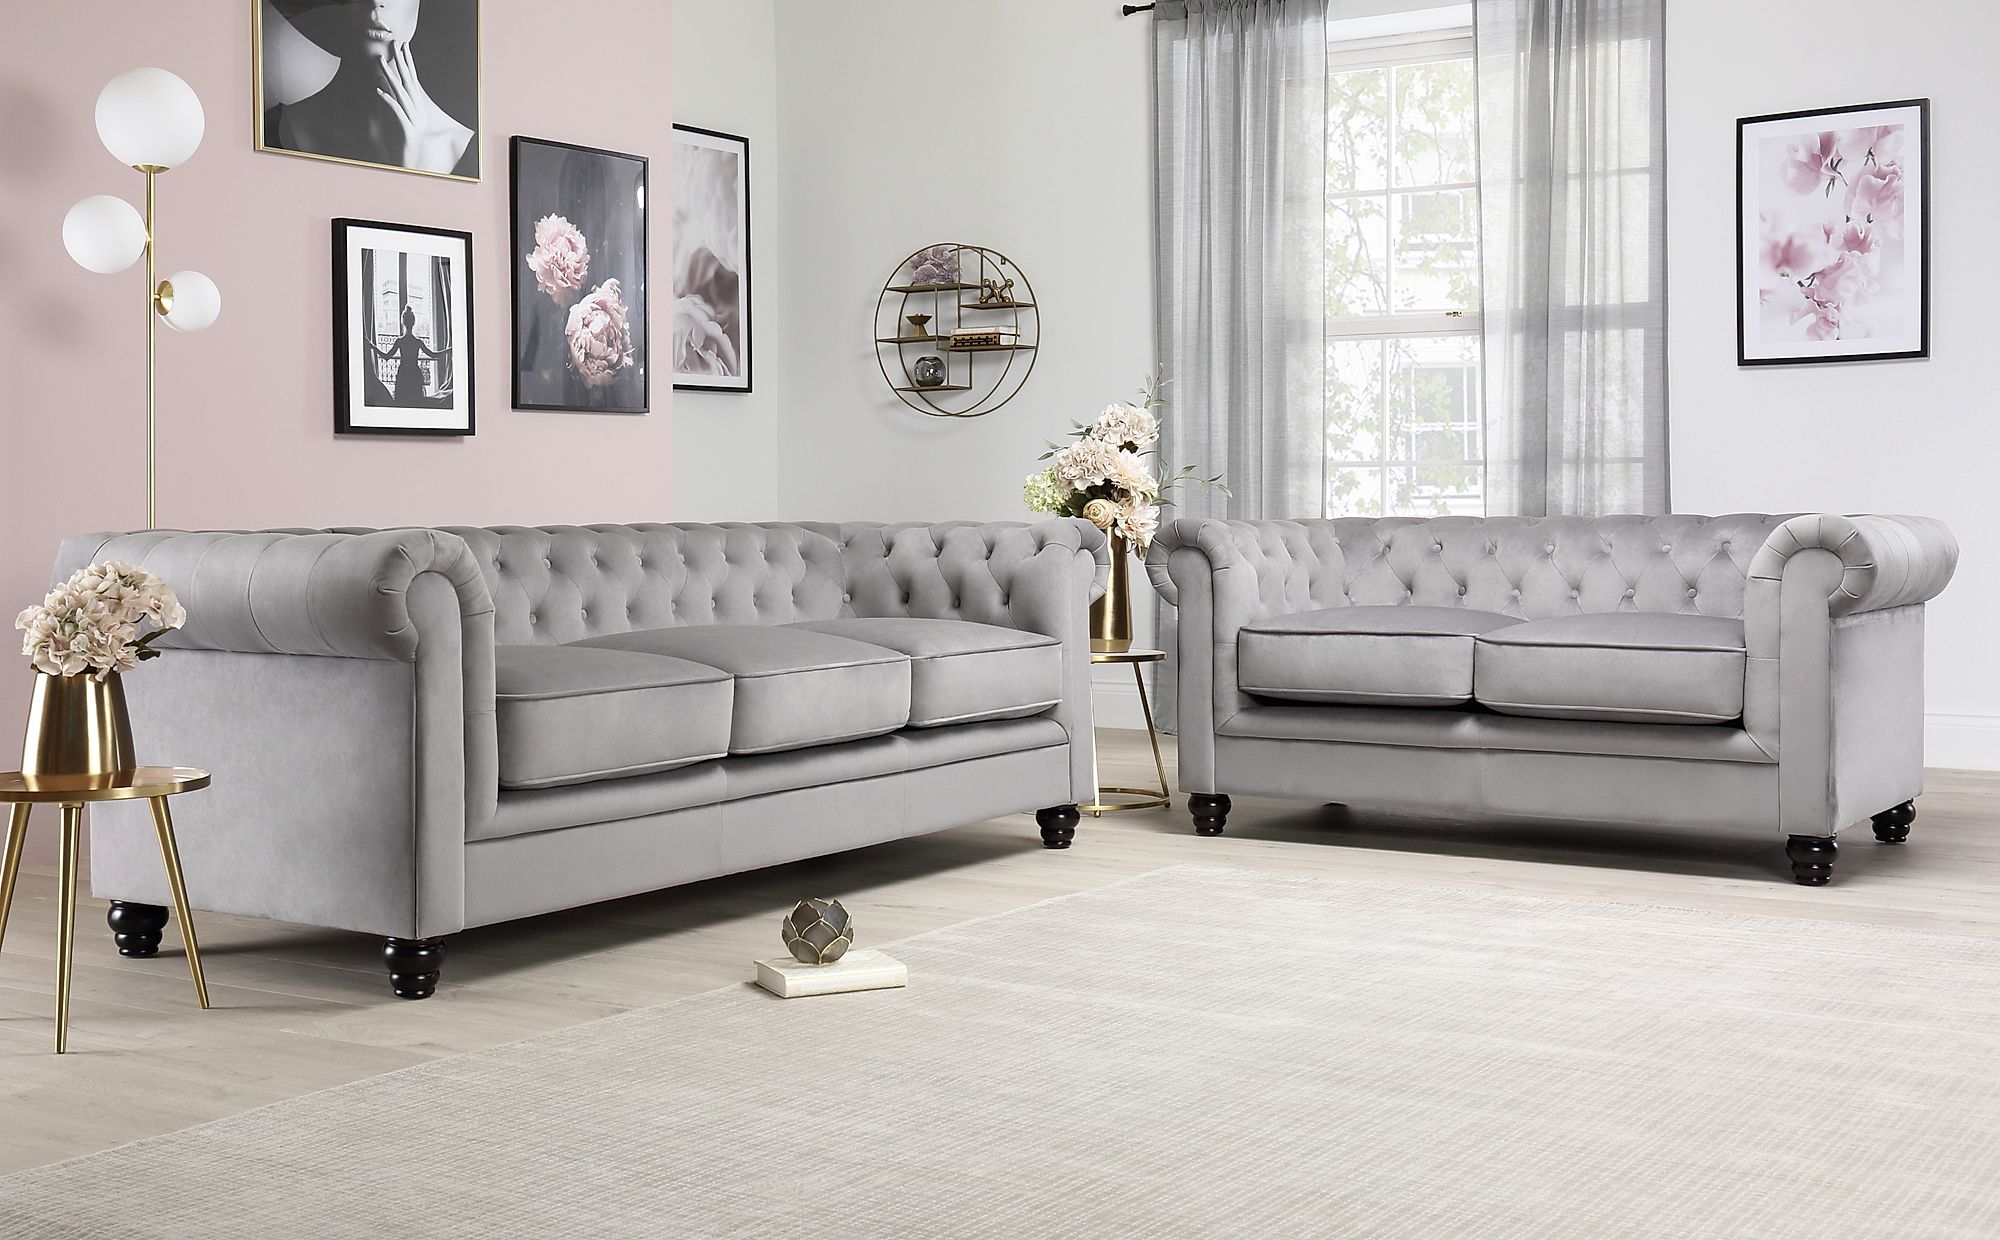 grey chesterfield living room